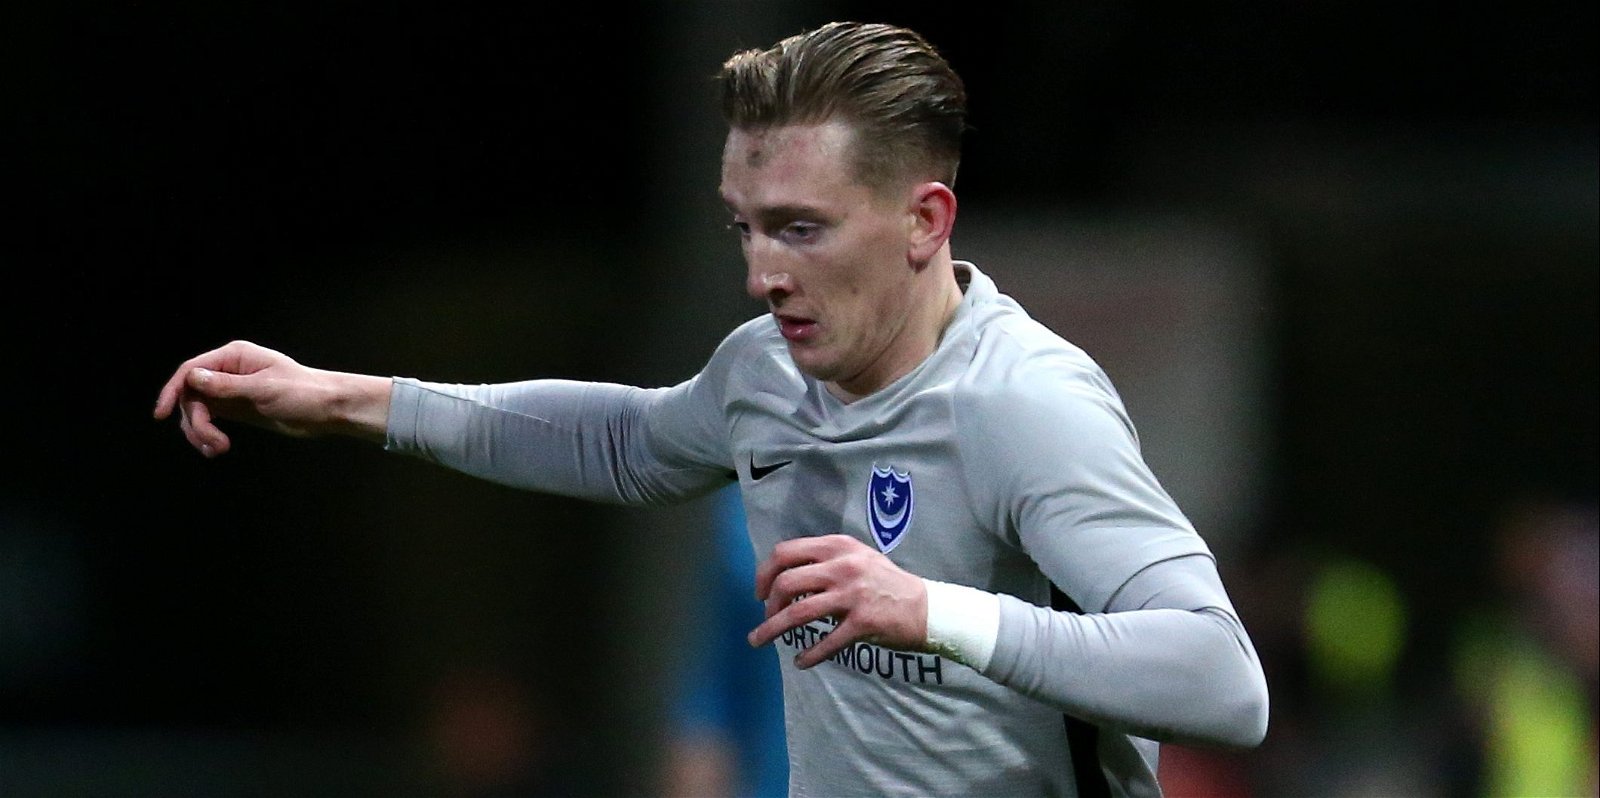 Portsmouth, Portsmouth&#8217;s 13-goal star reveals rejected transfer offers amid Blackburn Rovers, Leeds United and Derby County links